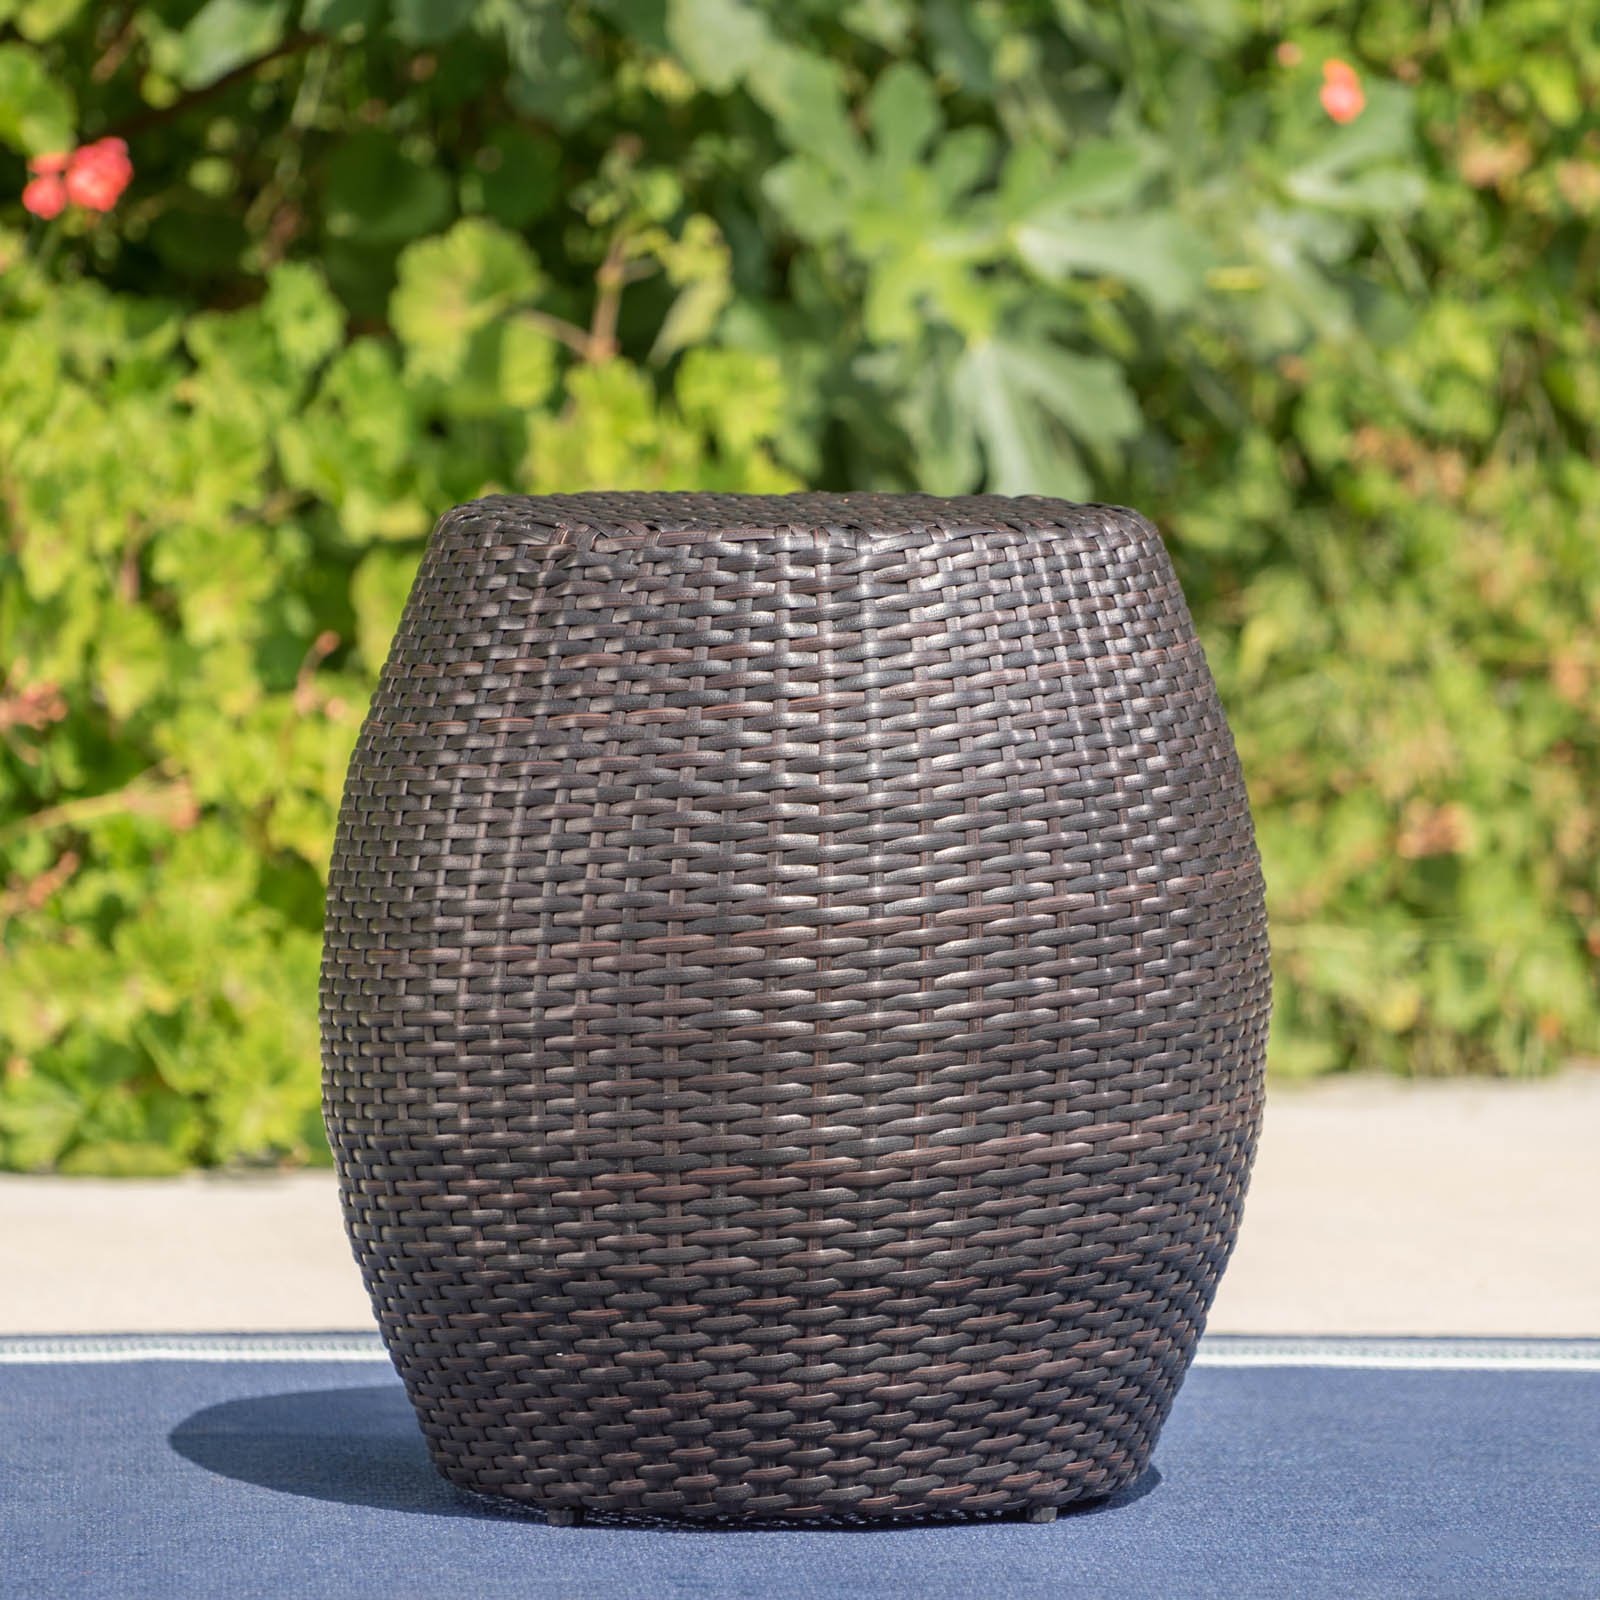 Canary Outdoor Wicker Side Table - image 1 of 2